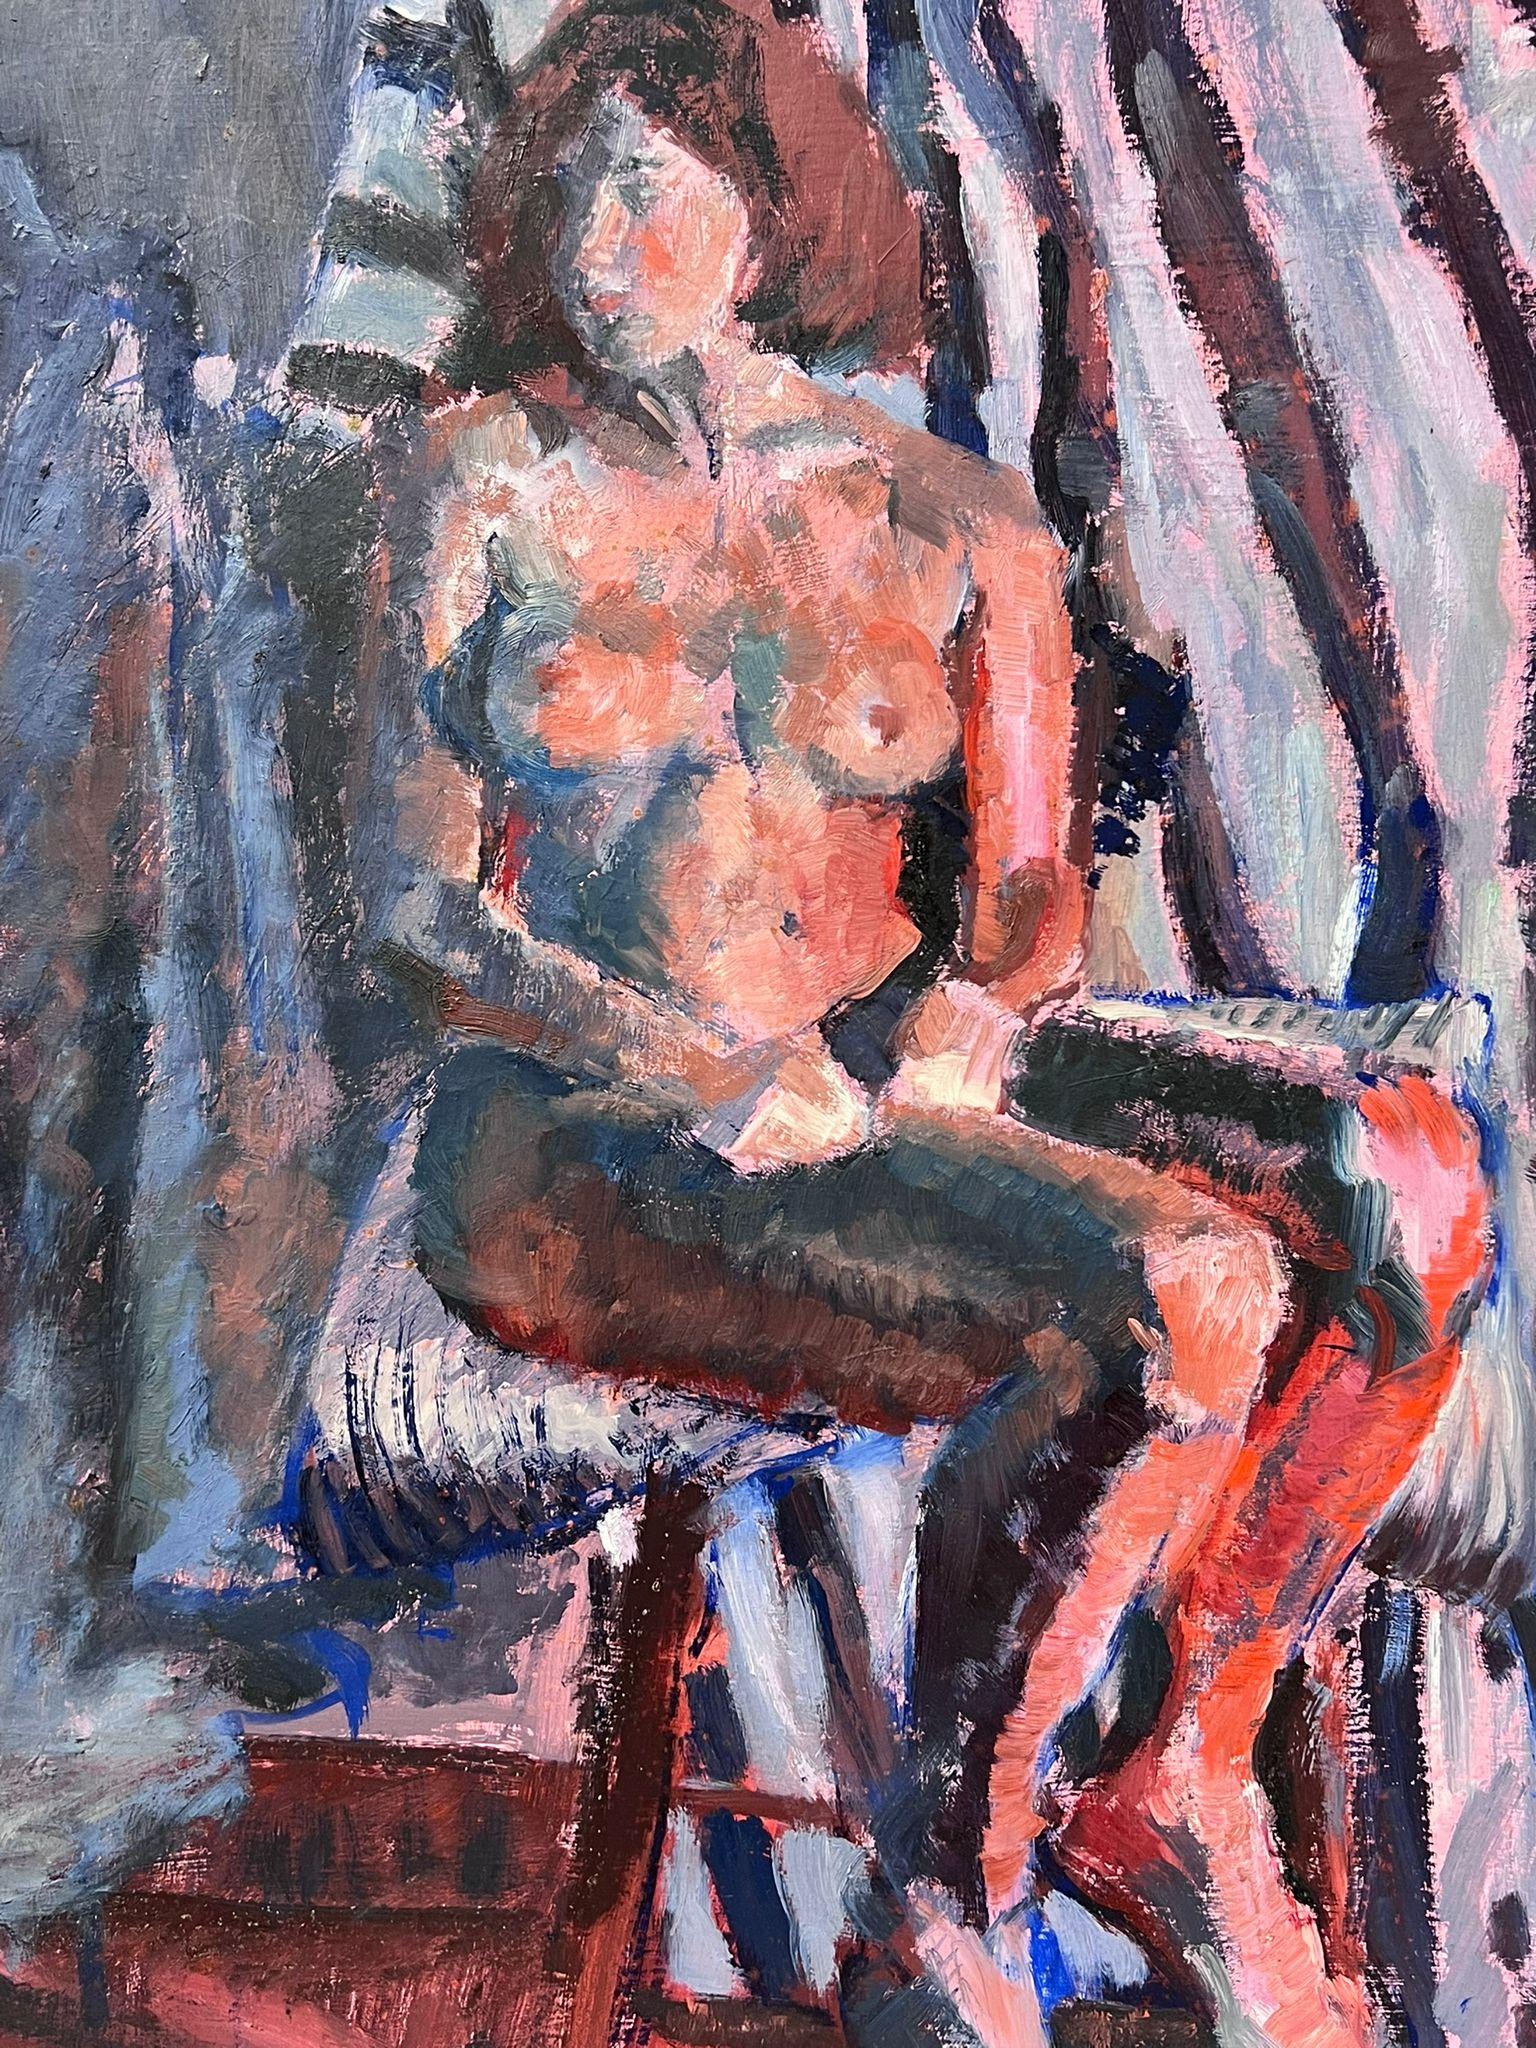 Nude Model
by Helen Greenfield (British 20th century) 
oil painting on board, unframed
board: 24 x 18 inches
condition: overall very good
provenance: all the paintings we have by this artist have come from their studio sale in England

Helen was a